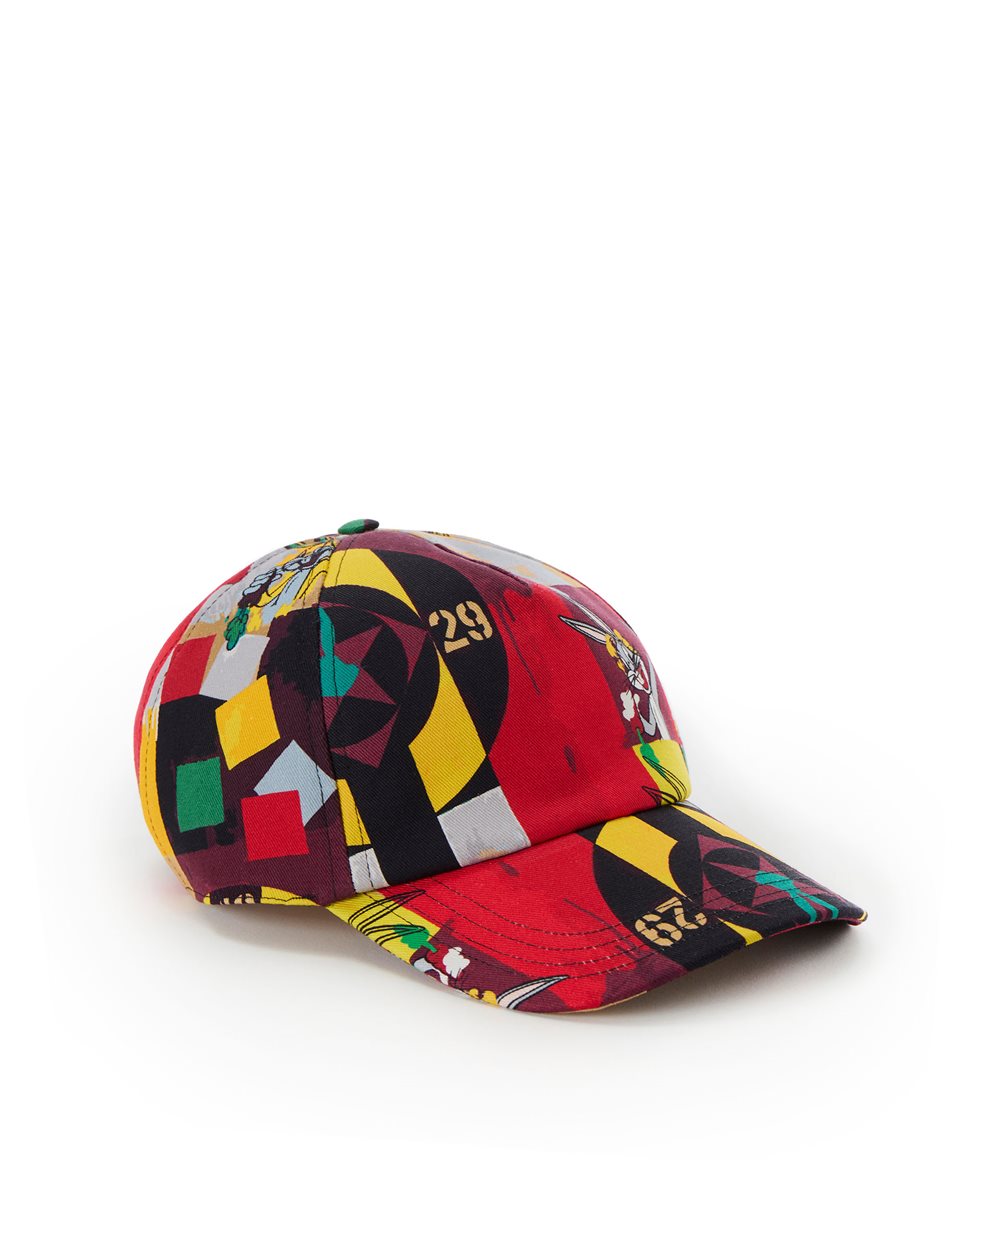 Baseball cap with cartoon graphics and logo - Hats and Scarves | Iceberg - Official Website